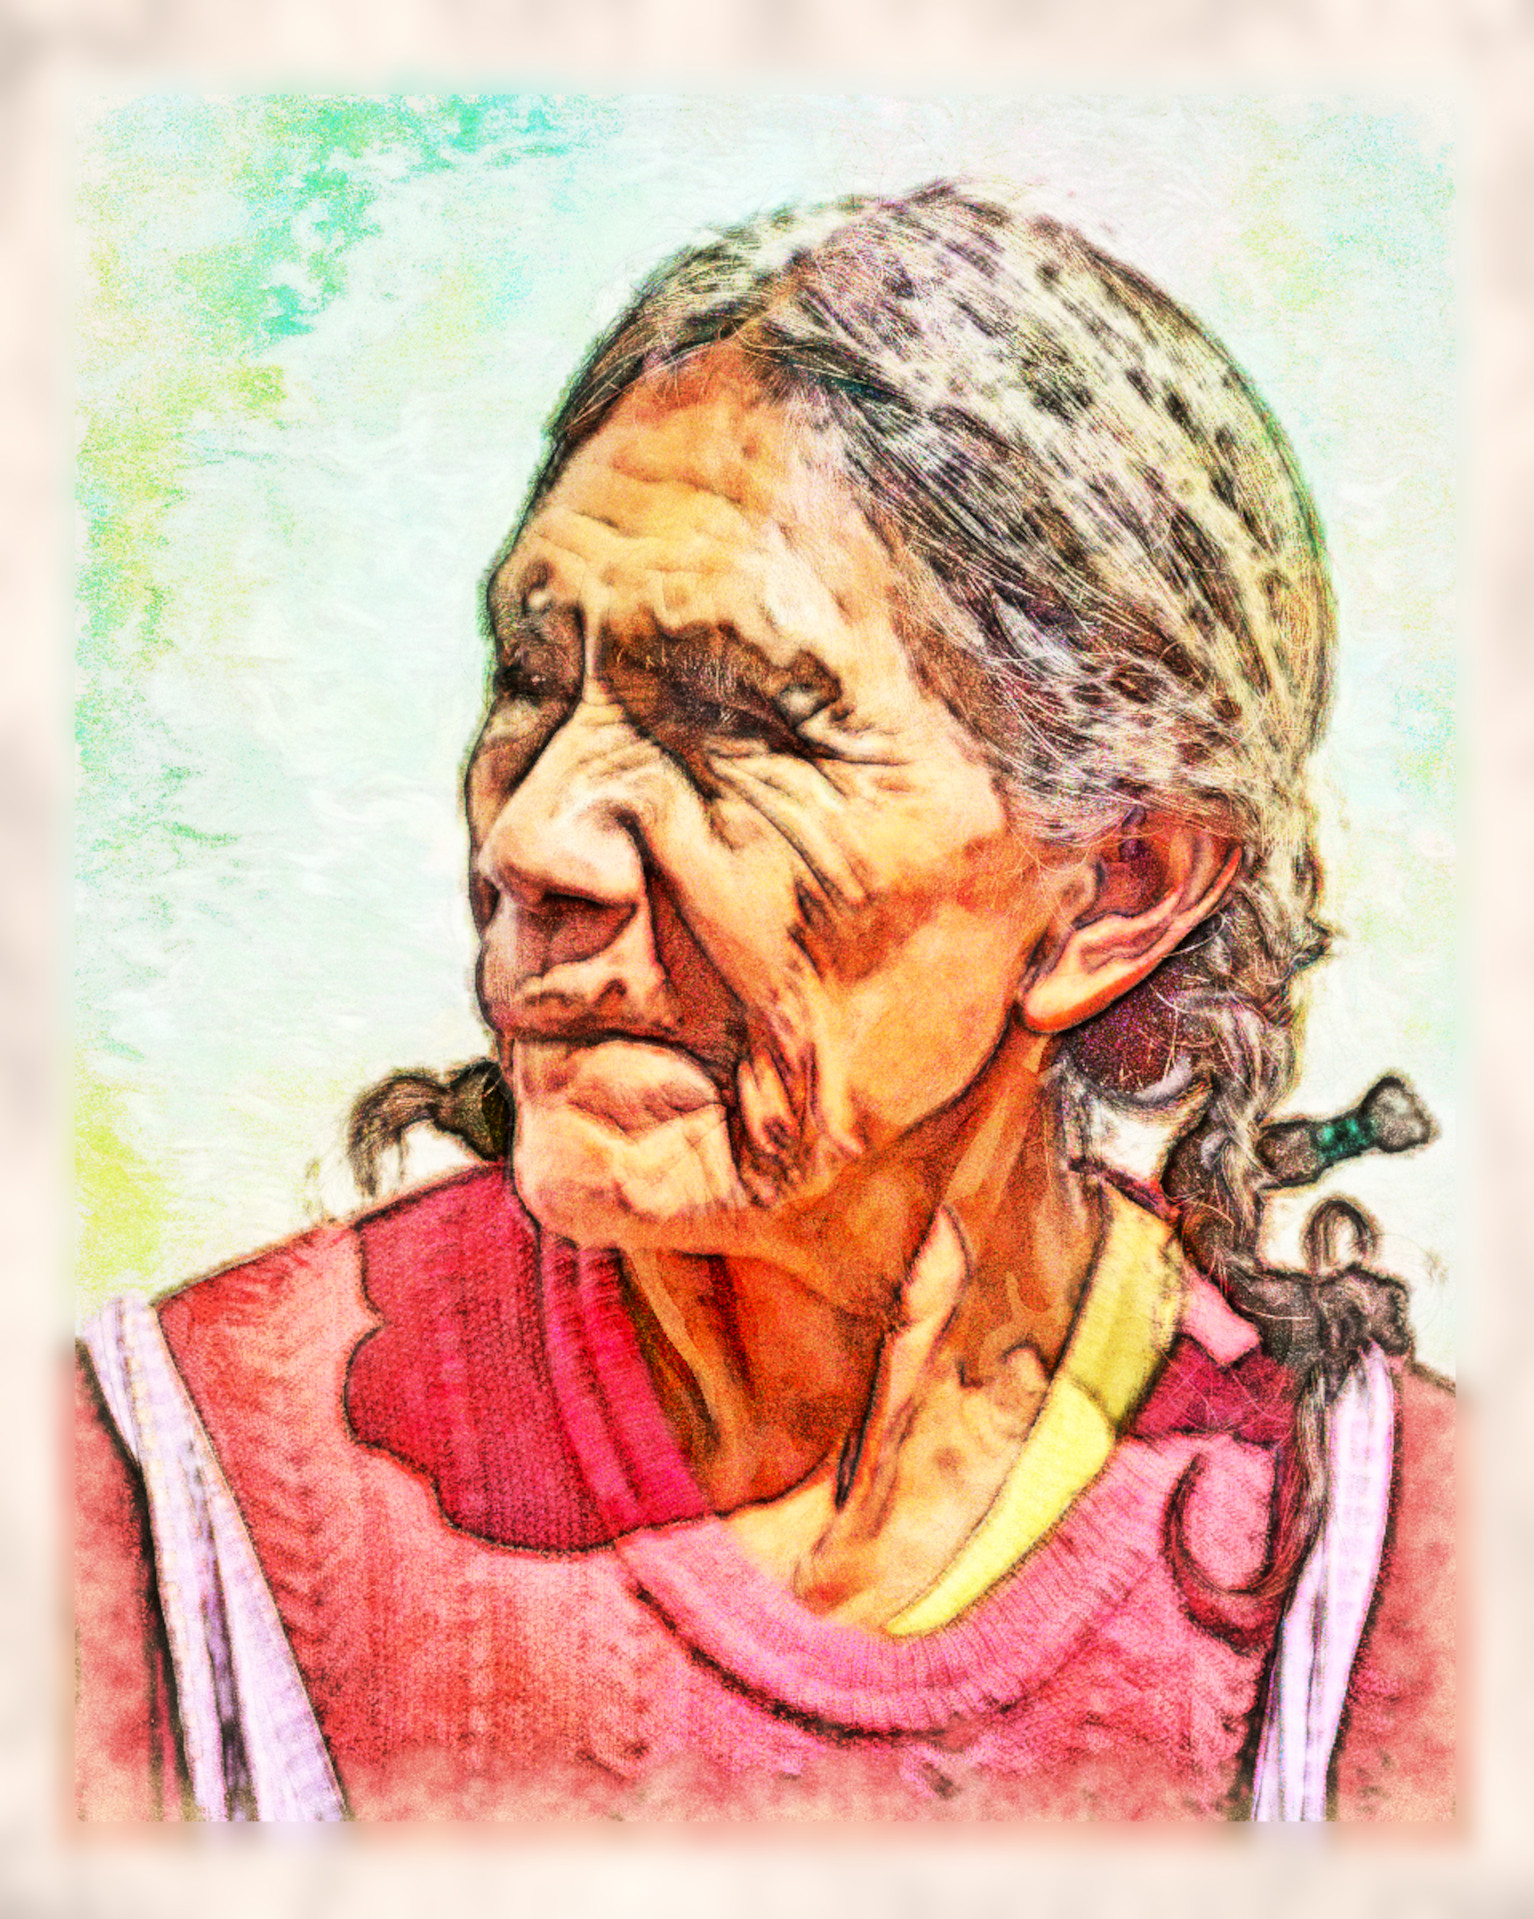 2023-09-29 11-01-31 woman-952506_1920 with a Watercolor Pastels Effect 2023 (4.0,75.0,32.0,50.0,20.0,8.0,80.0,True).jpeg